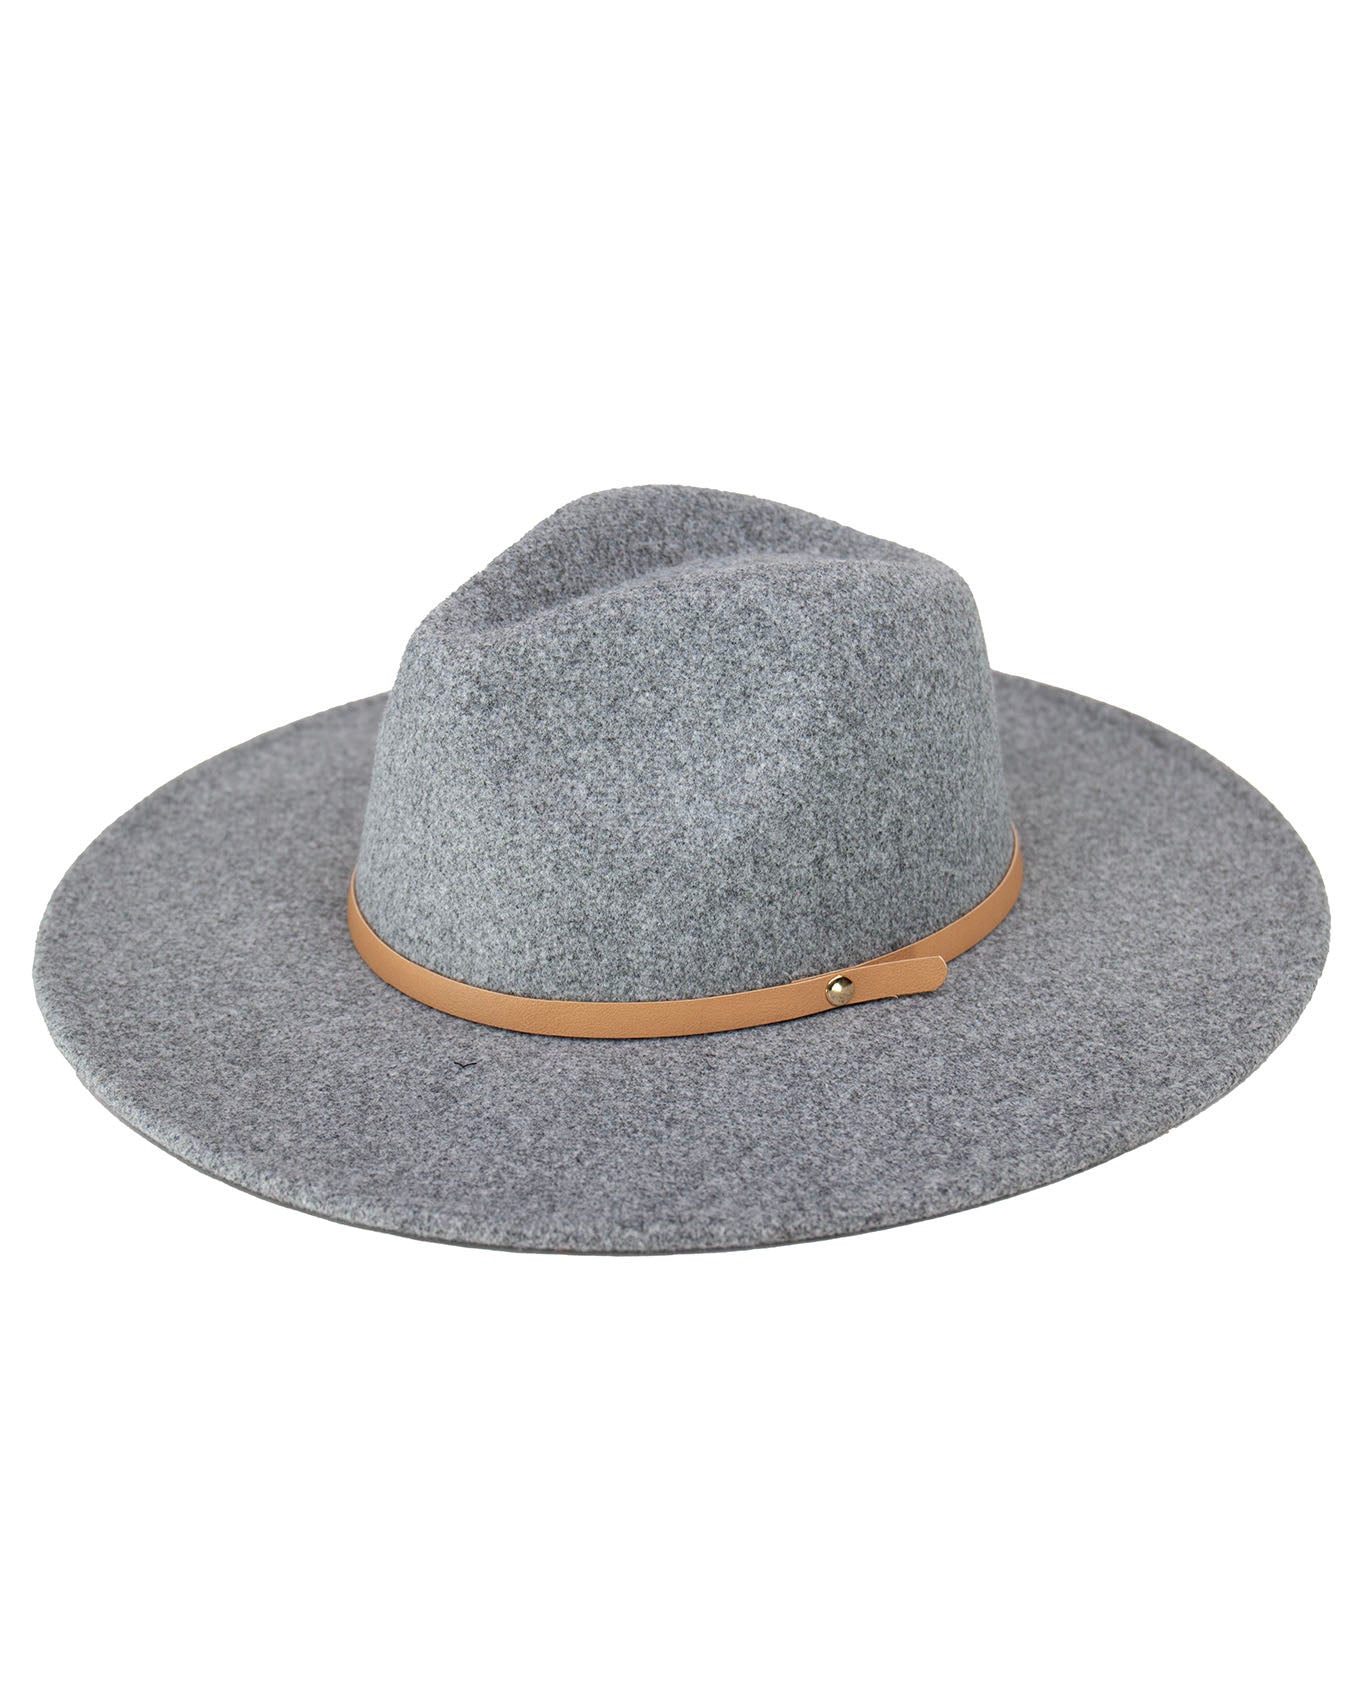 Wide Brim Felt Hat in Camel by Grace and Lace